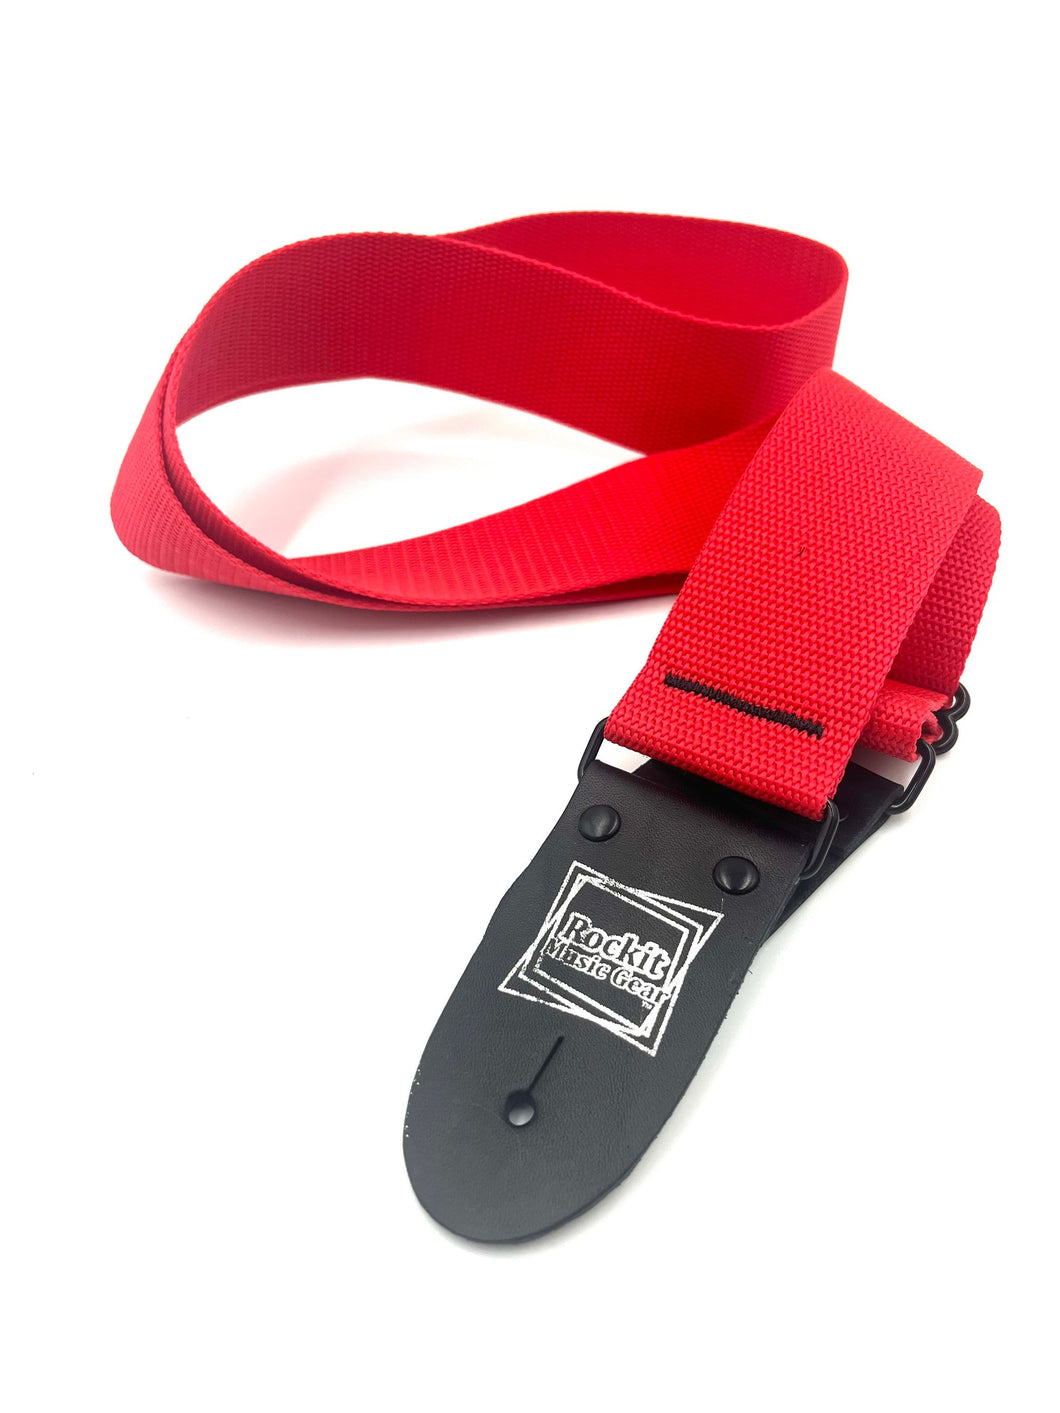 Rockit Music Gear 2 Inch Polypro Guitar Strap - Red